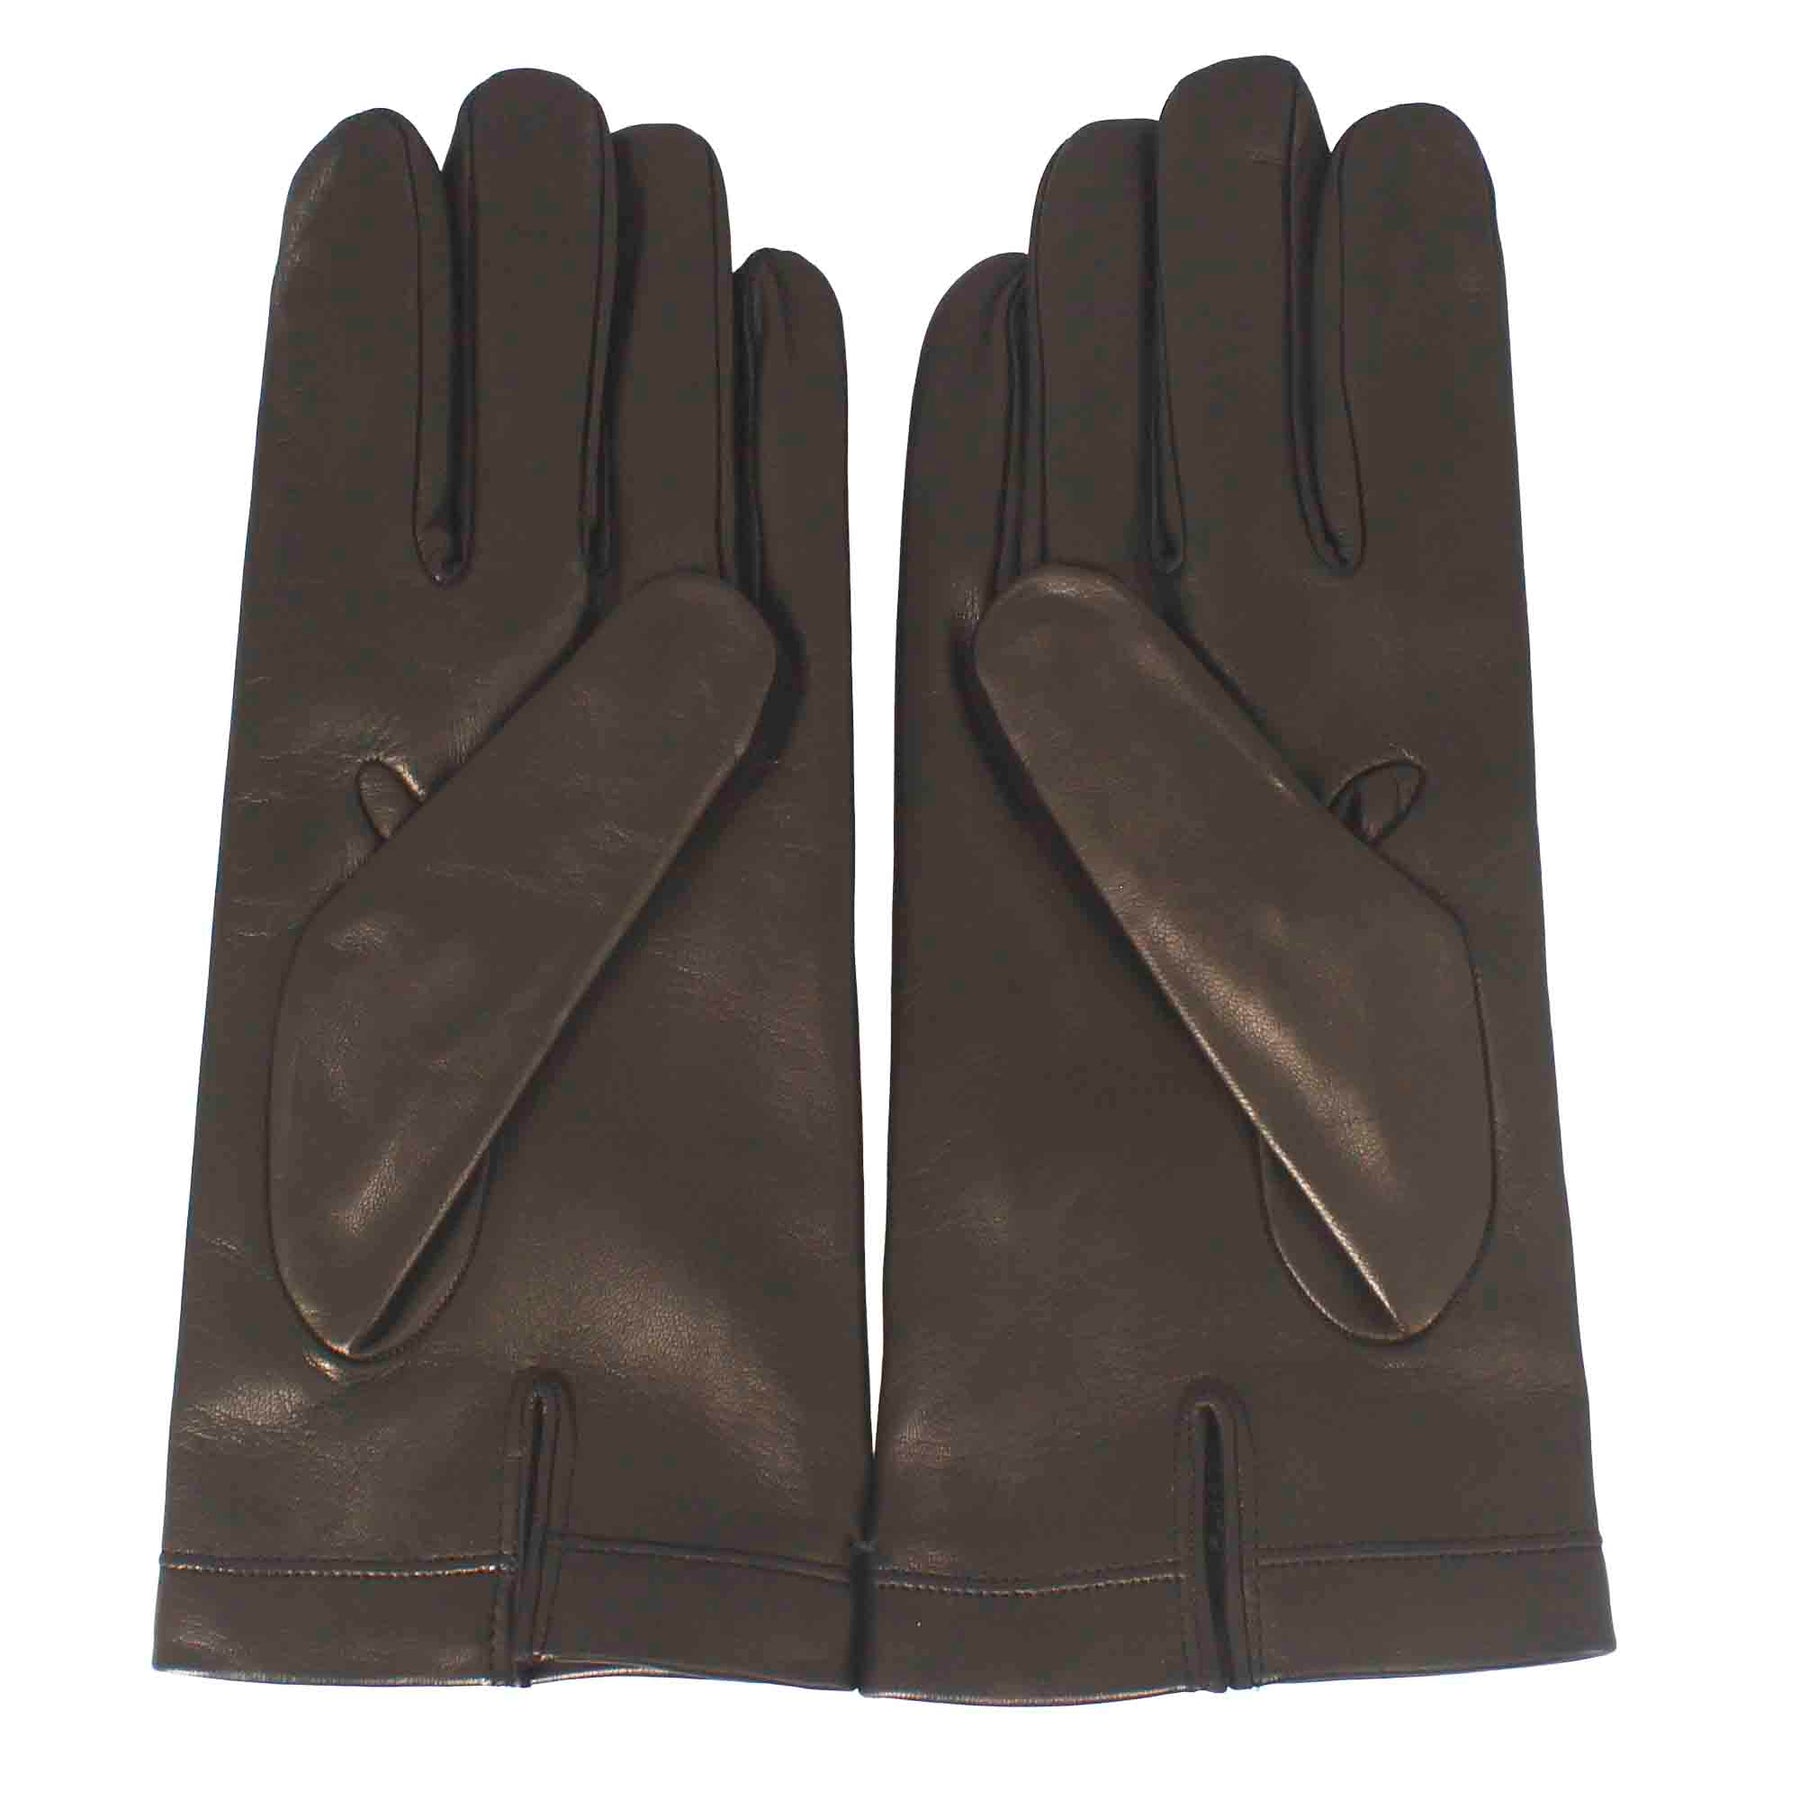 Handmade men's gloves in brown nappa leather lined in cashmere